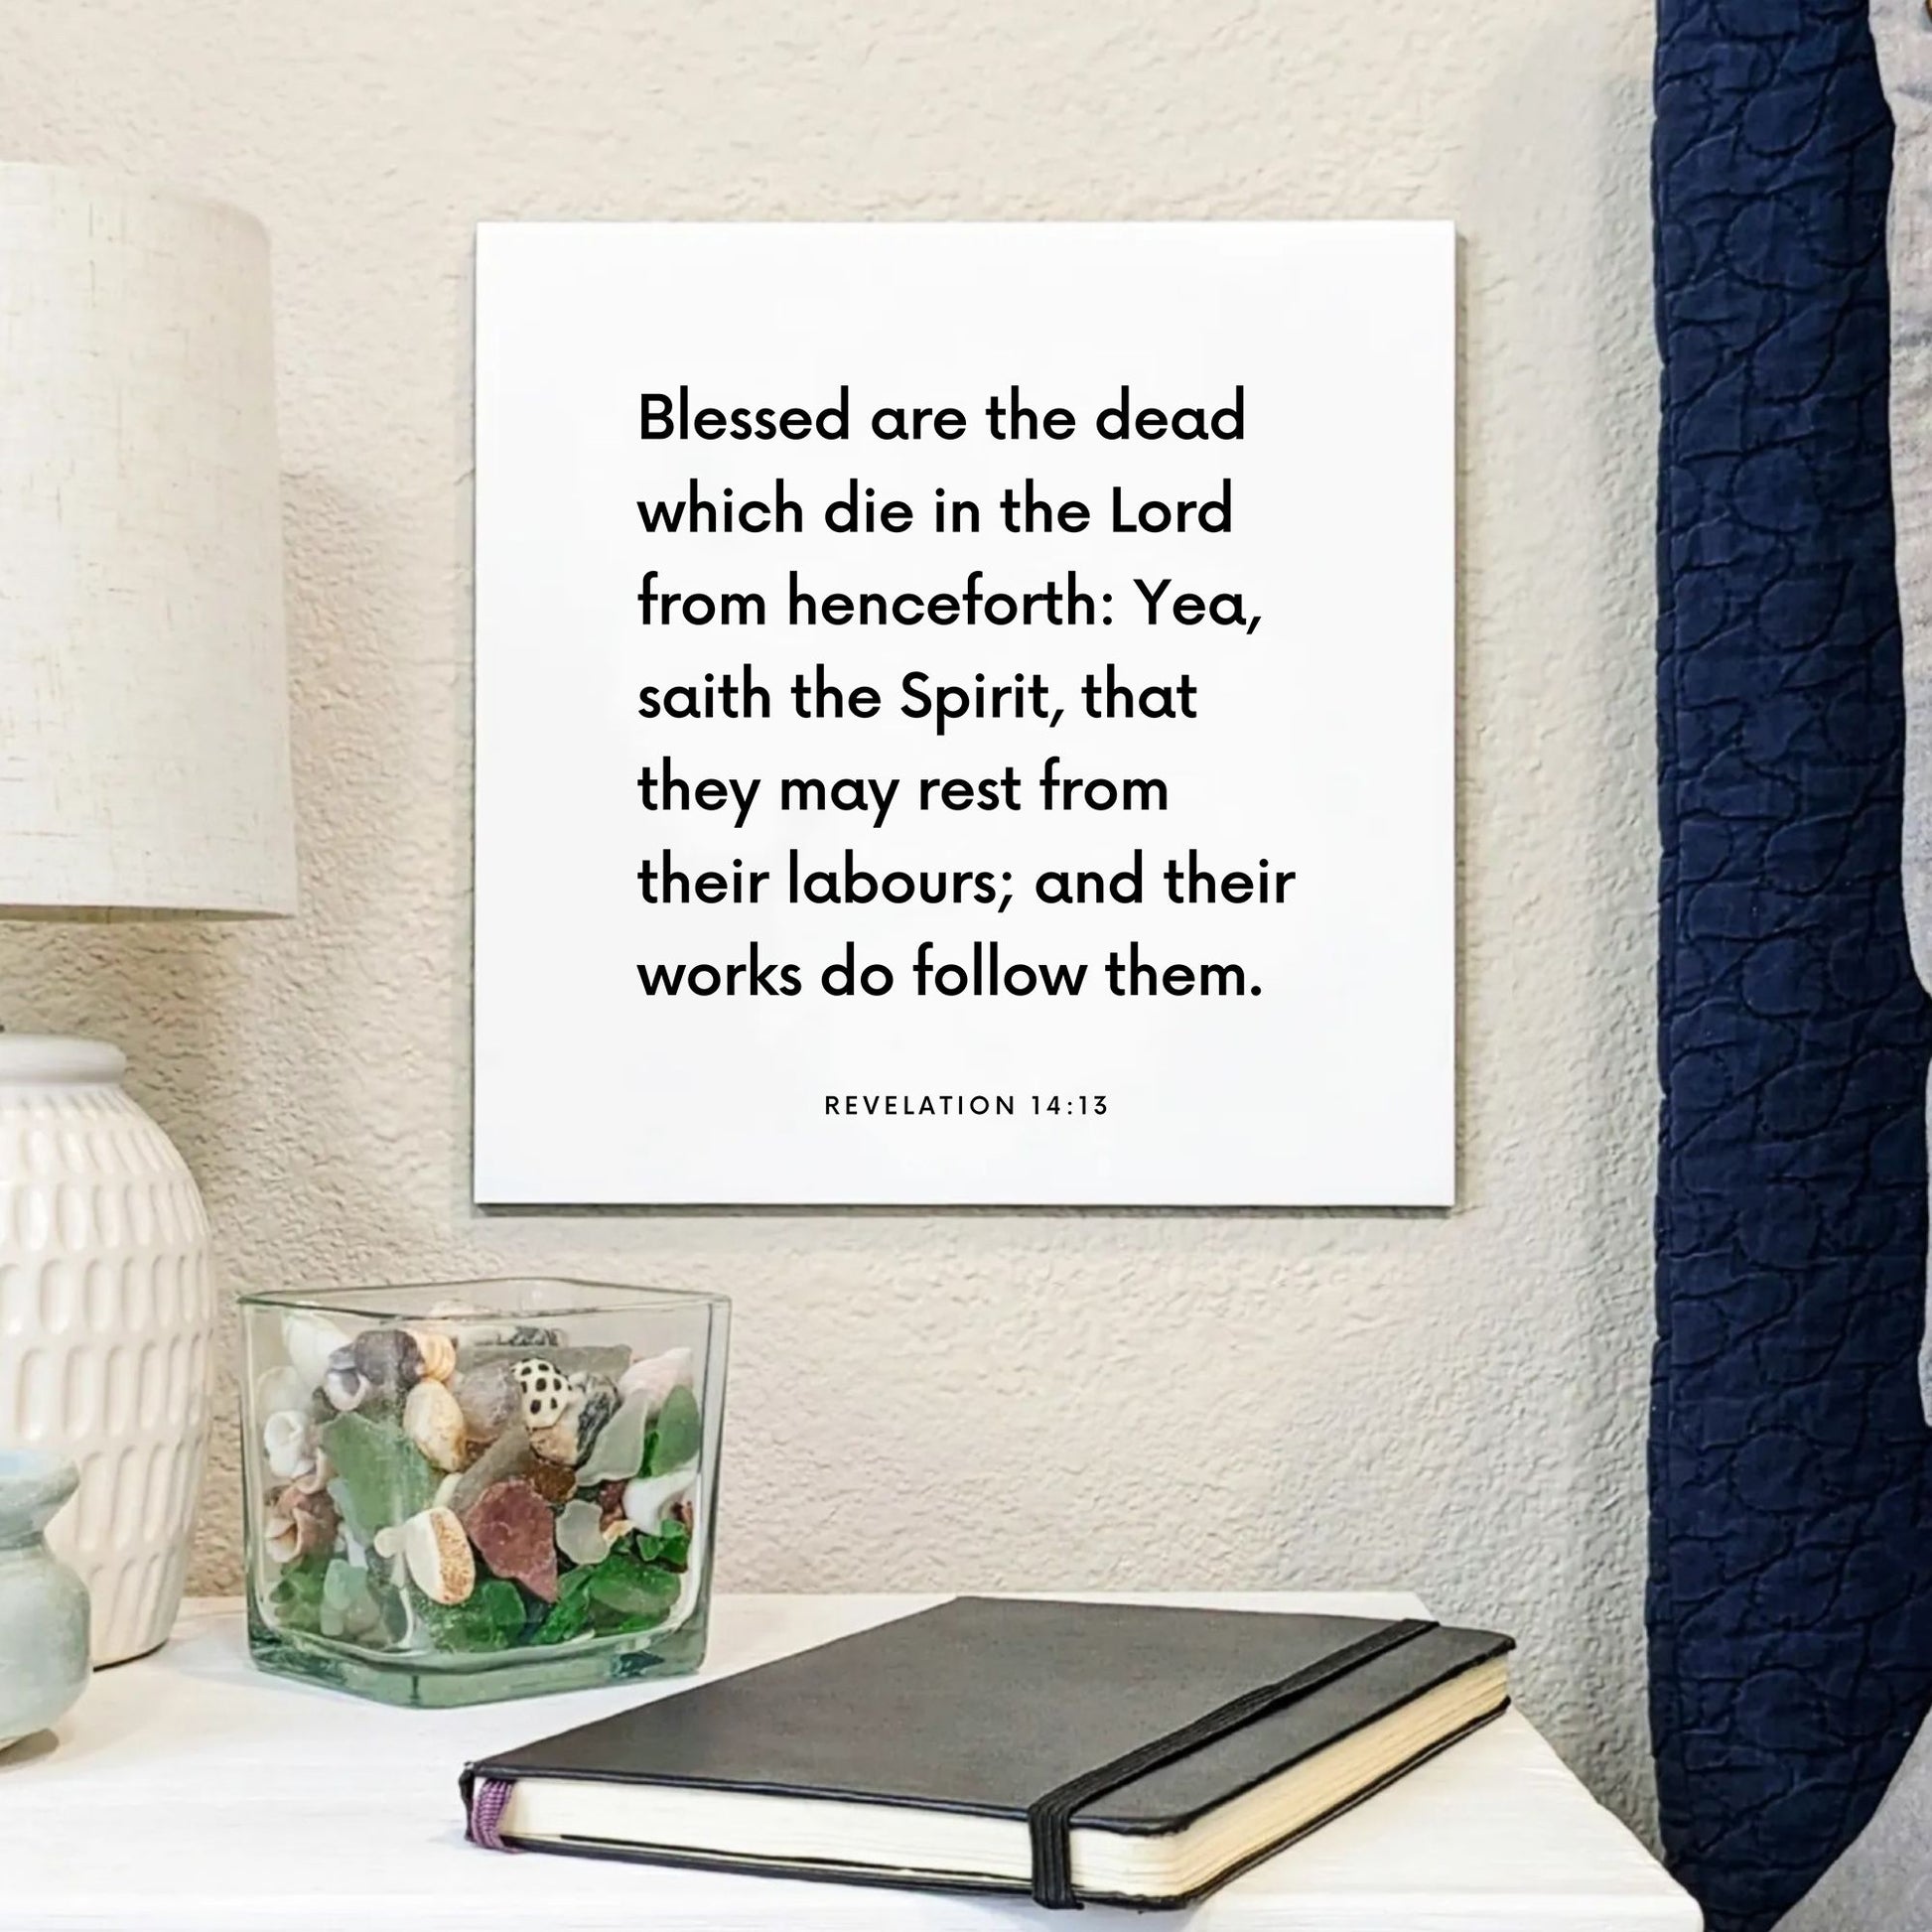 Bedside mouting of the scripture tile for Revelation 14:13 - "Blessed are the dead which die in the Lord"